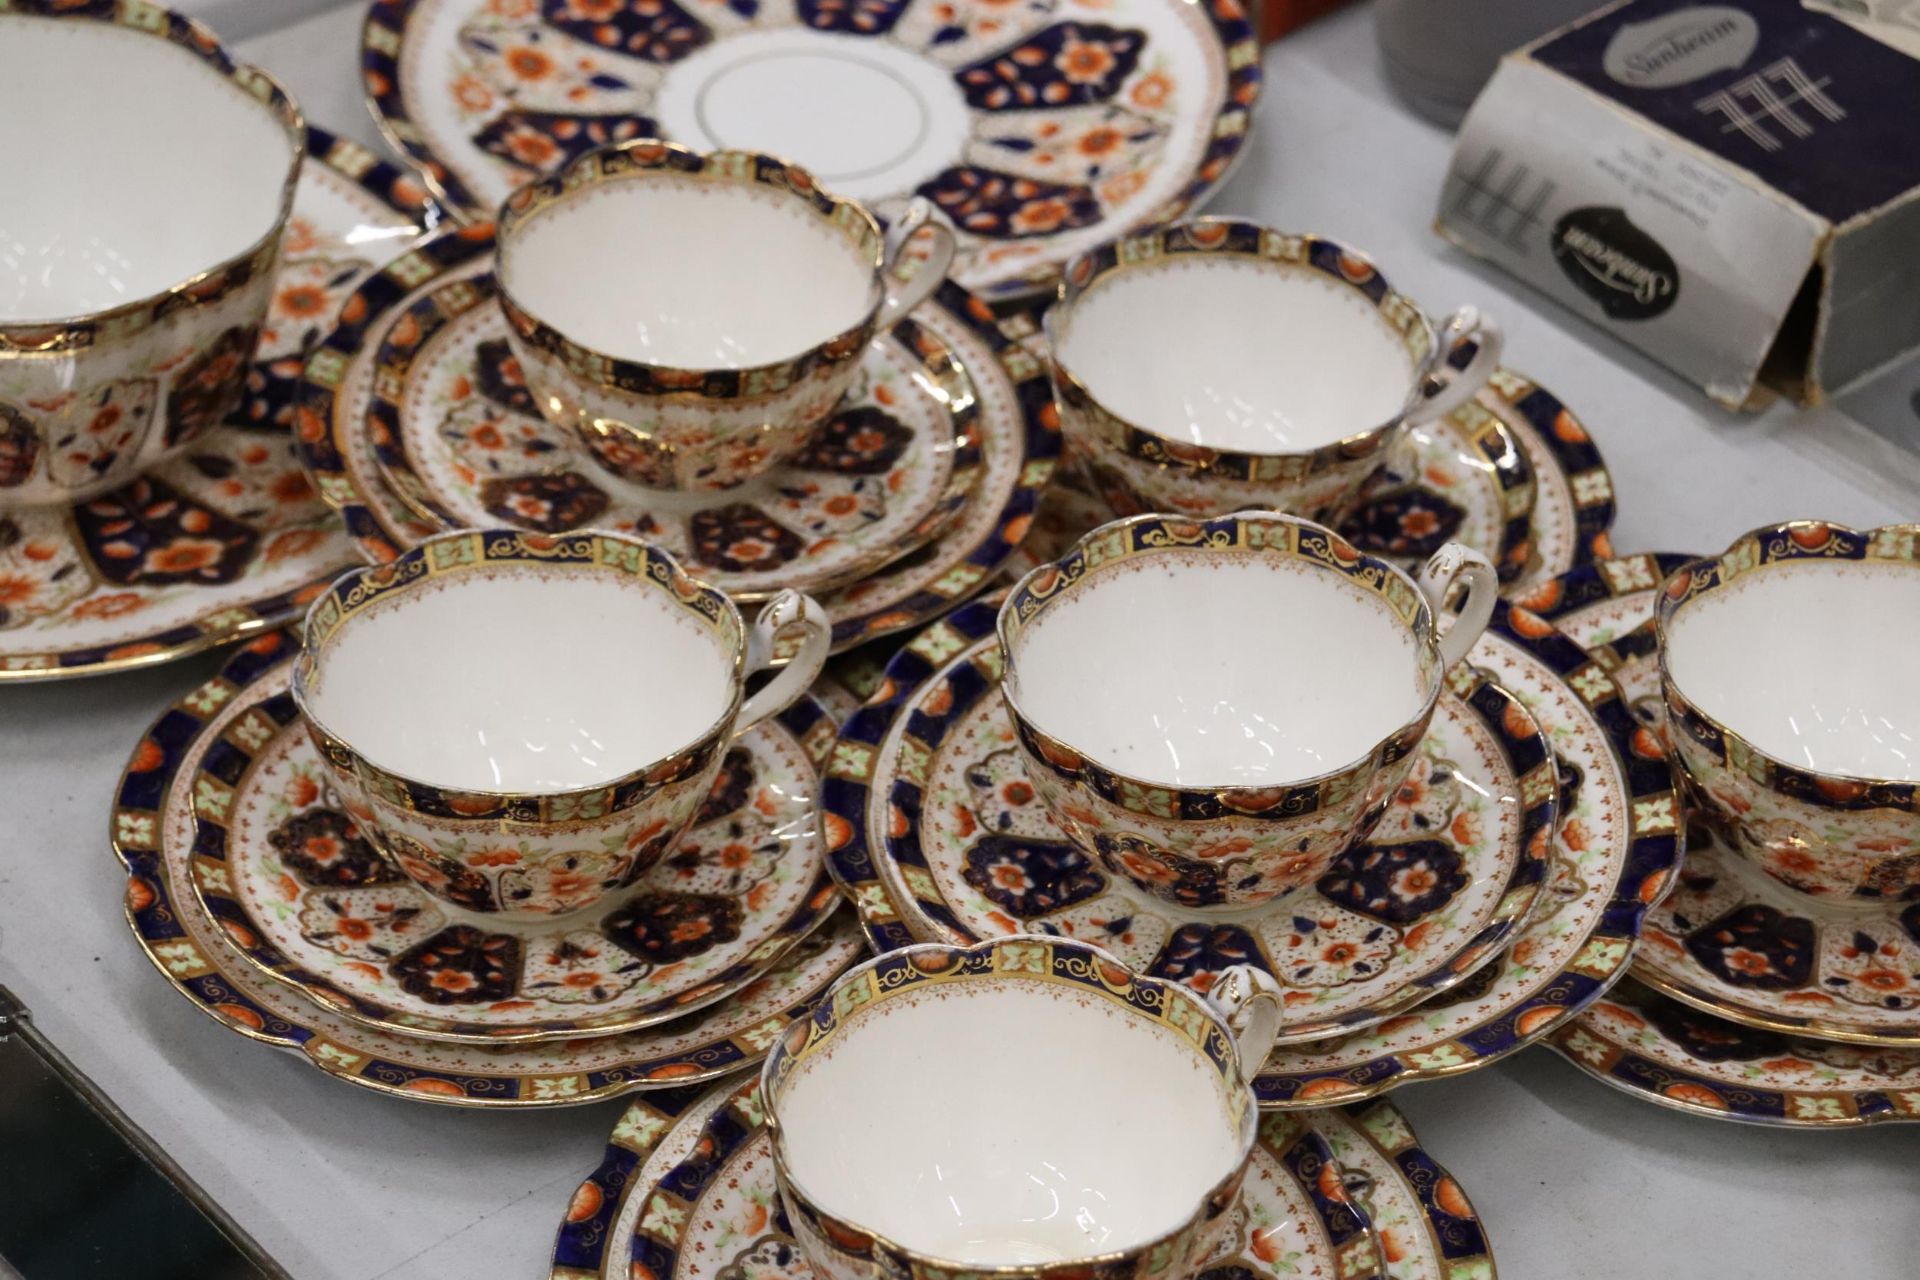 AN ANTIQUE 'COURT CHINA' TEASET TO INCLUDE CAKE PLATES, CUPS, SAUCERS, SIDE PLATES AND A SUGAR BOWL - Image 8 of 9